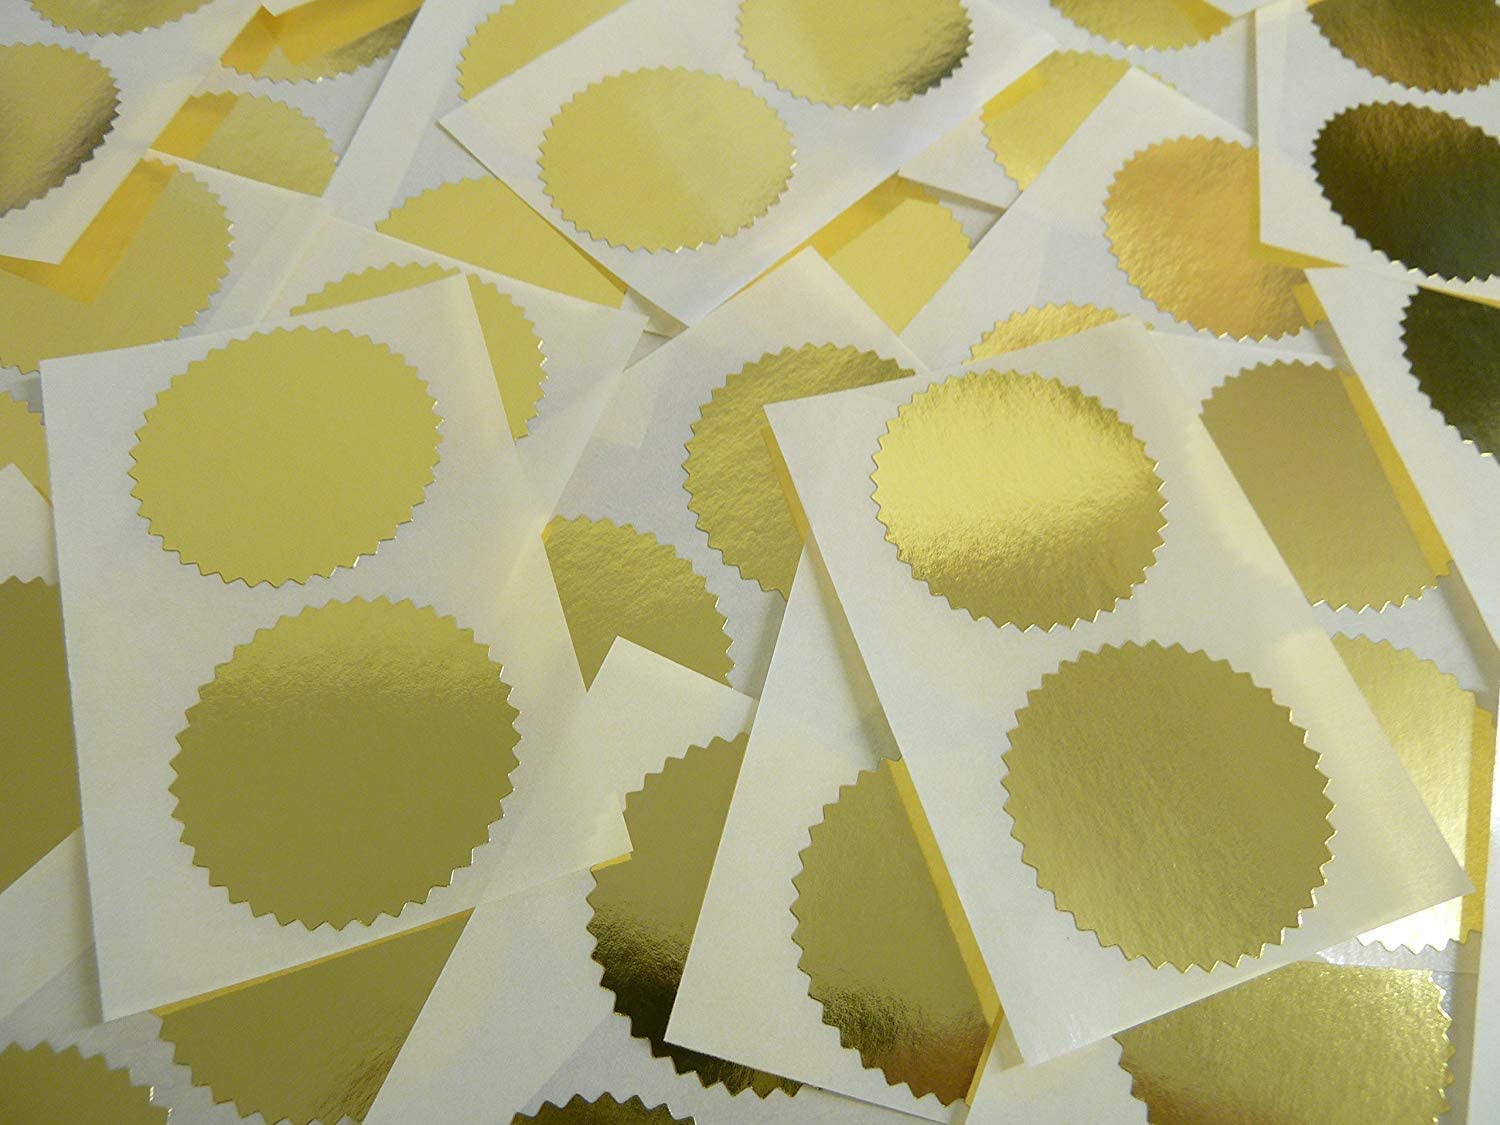 Set of 300 pieces of round gold foil stickers